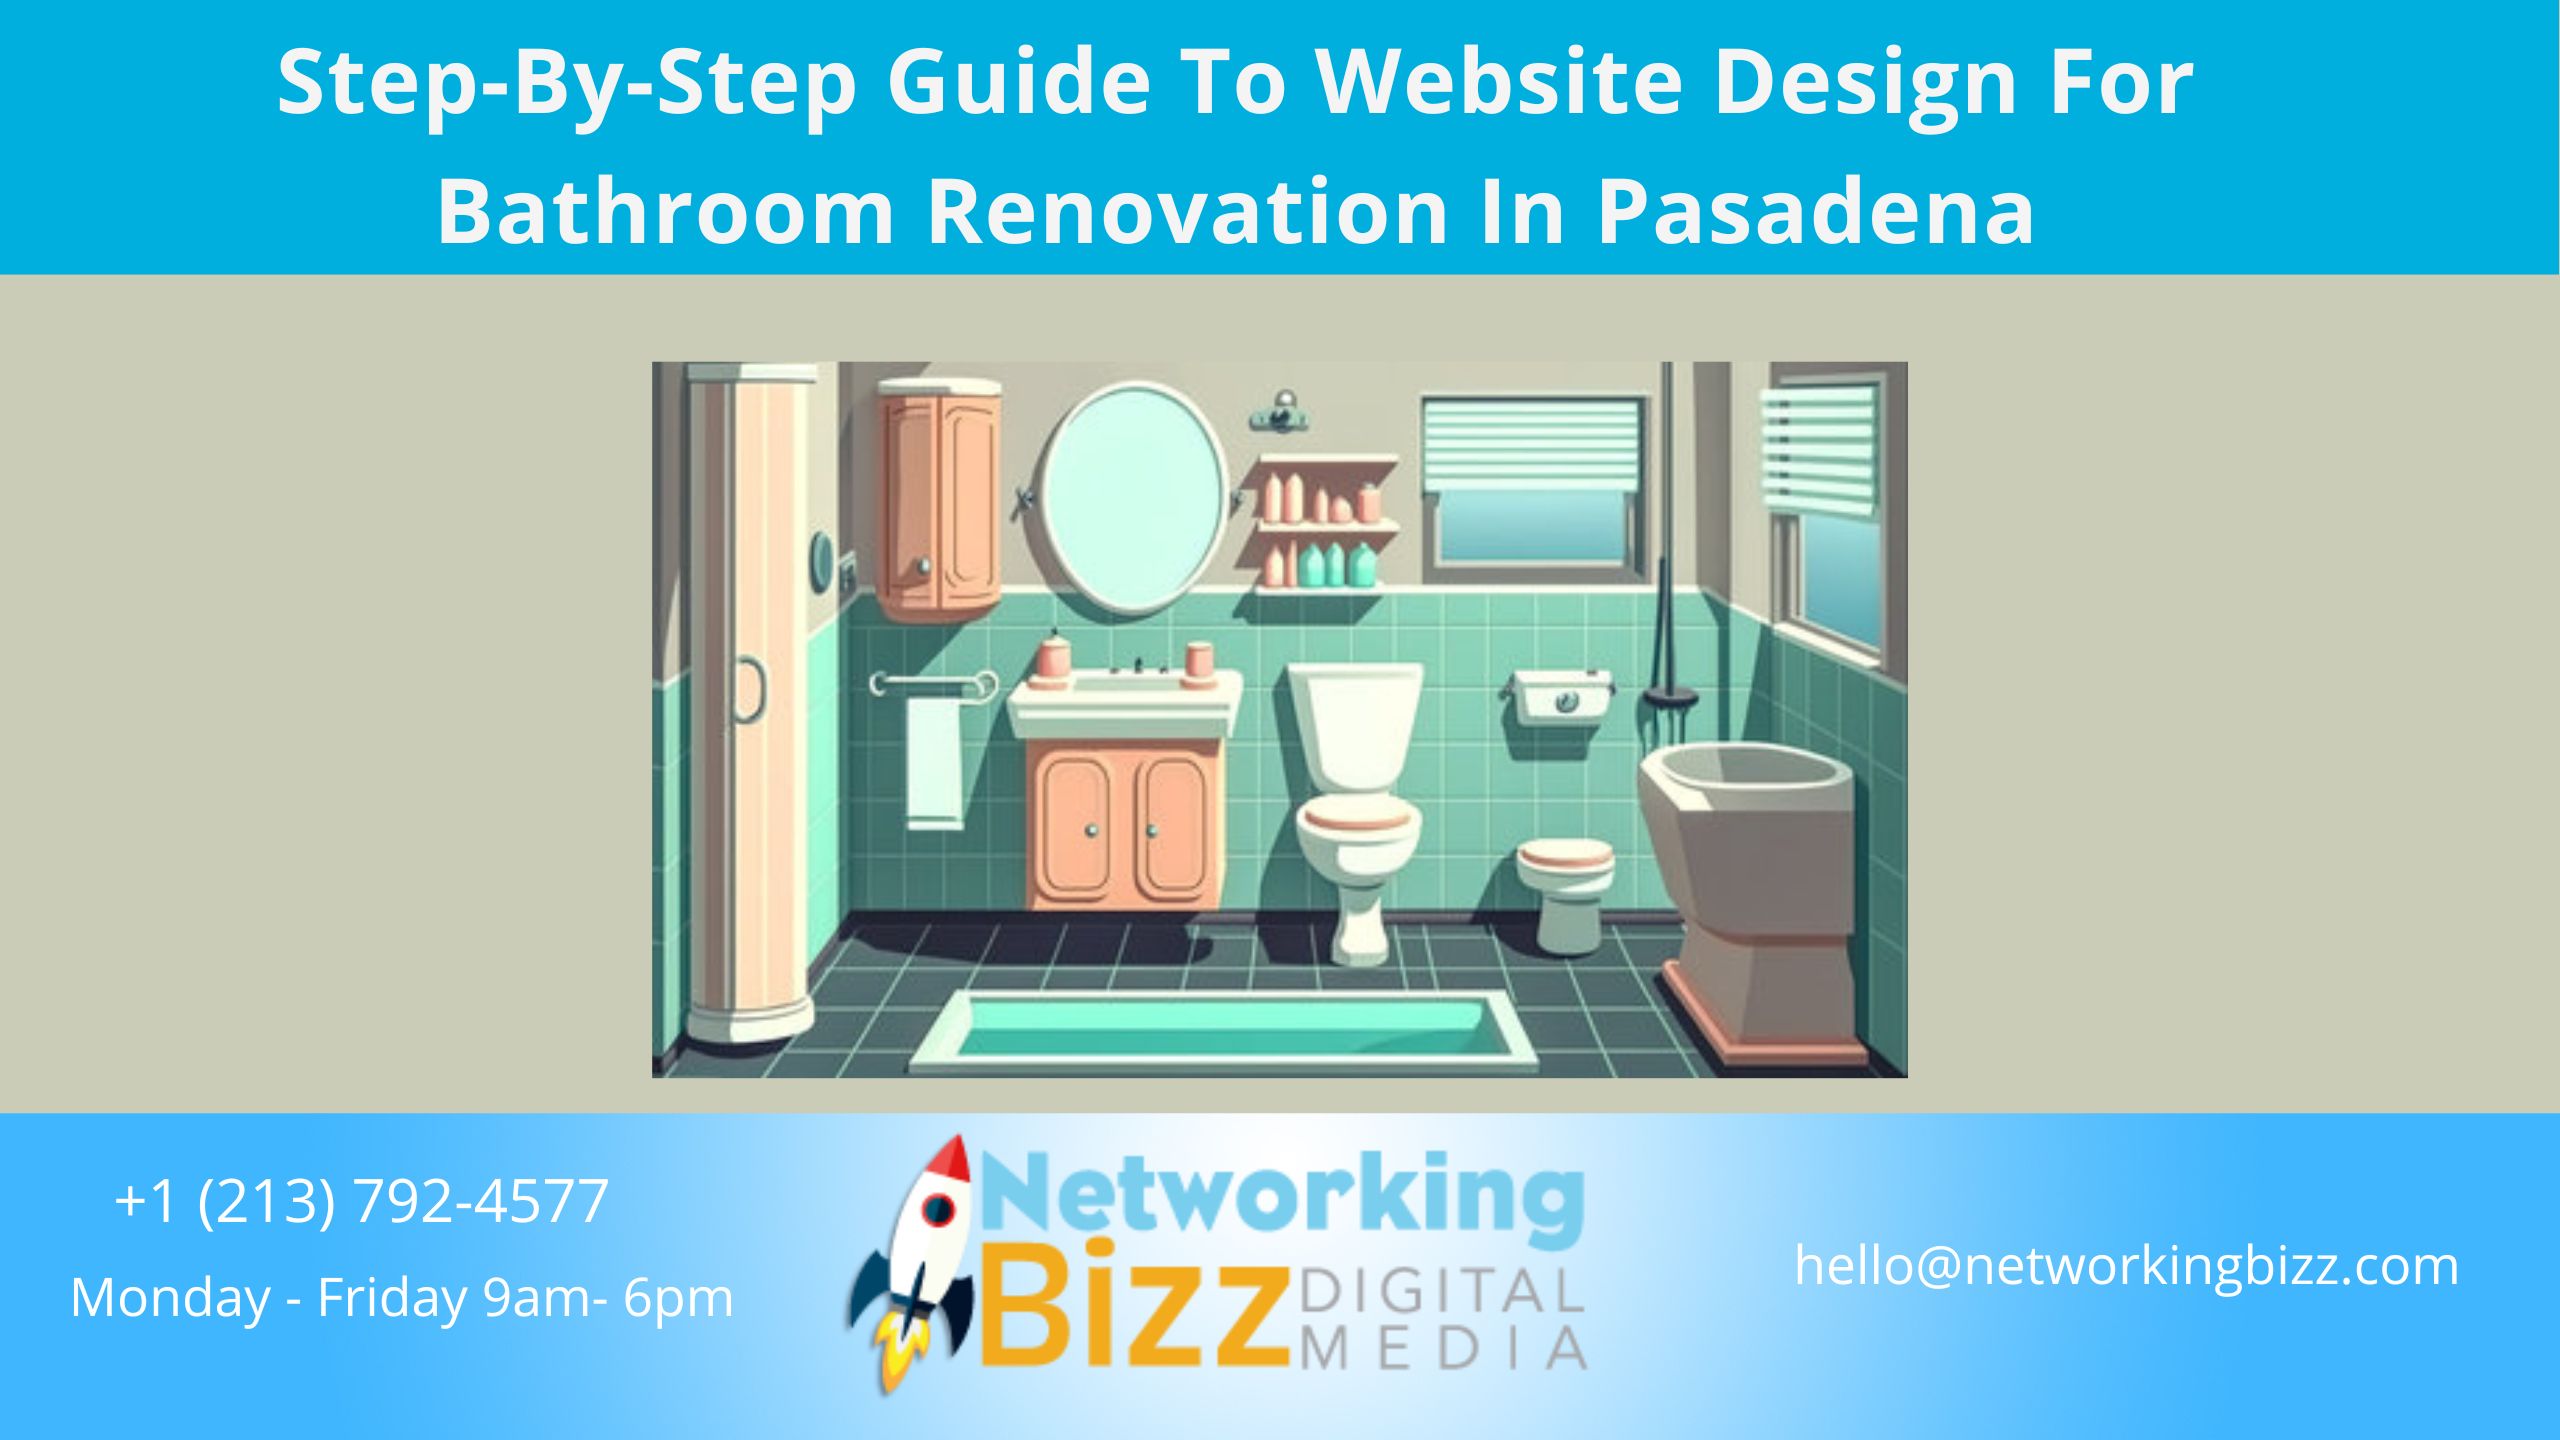 Step-By-Step Guide To Website Design For Bathroom Renovation In Pasadena